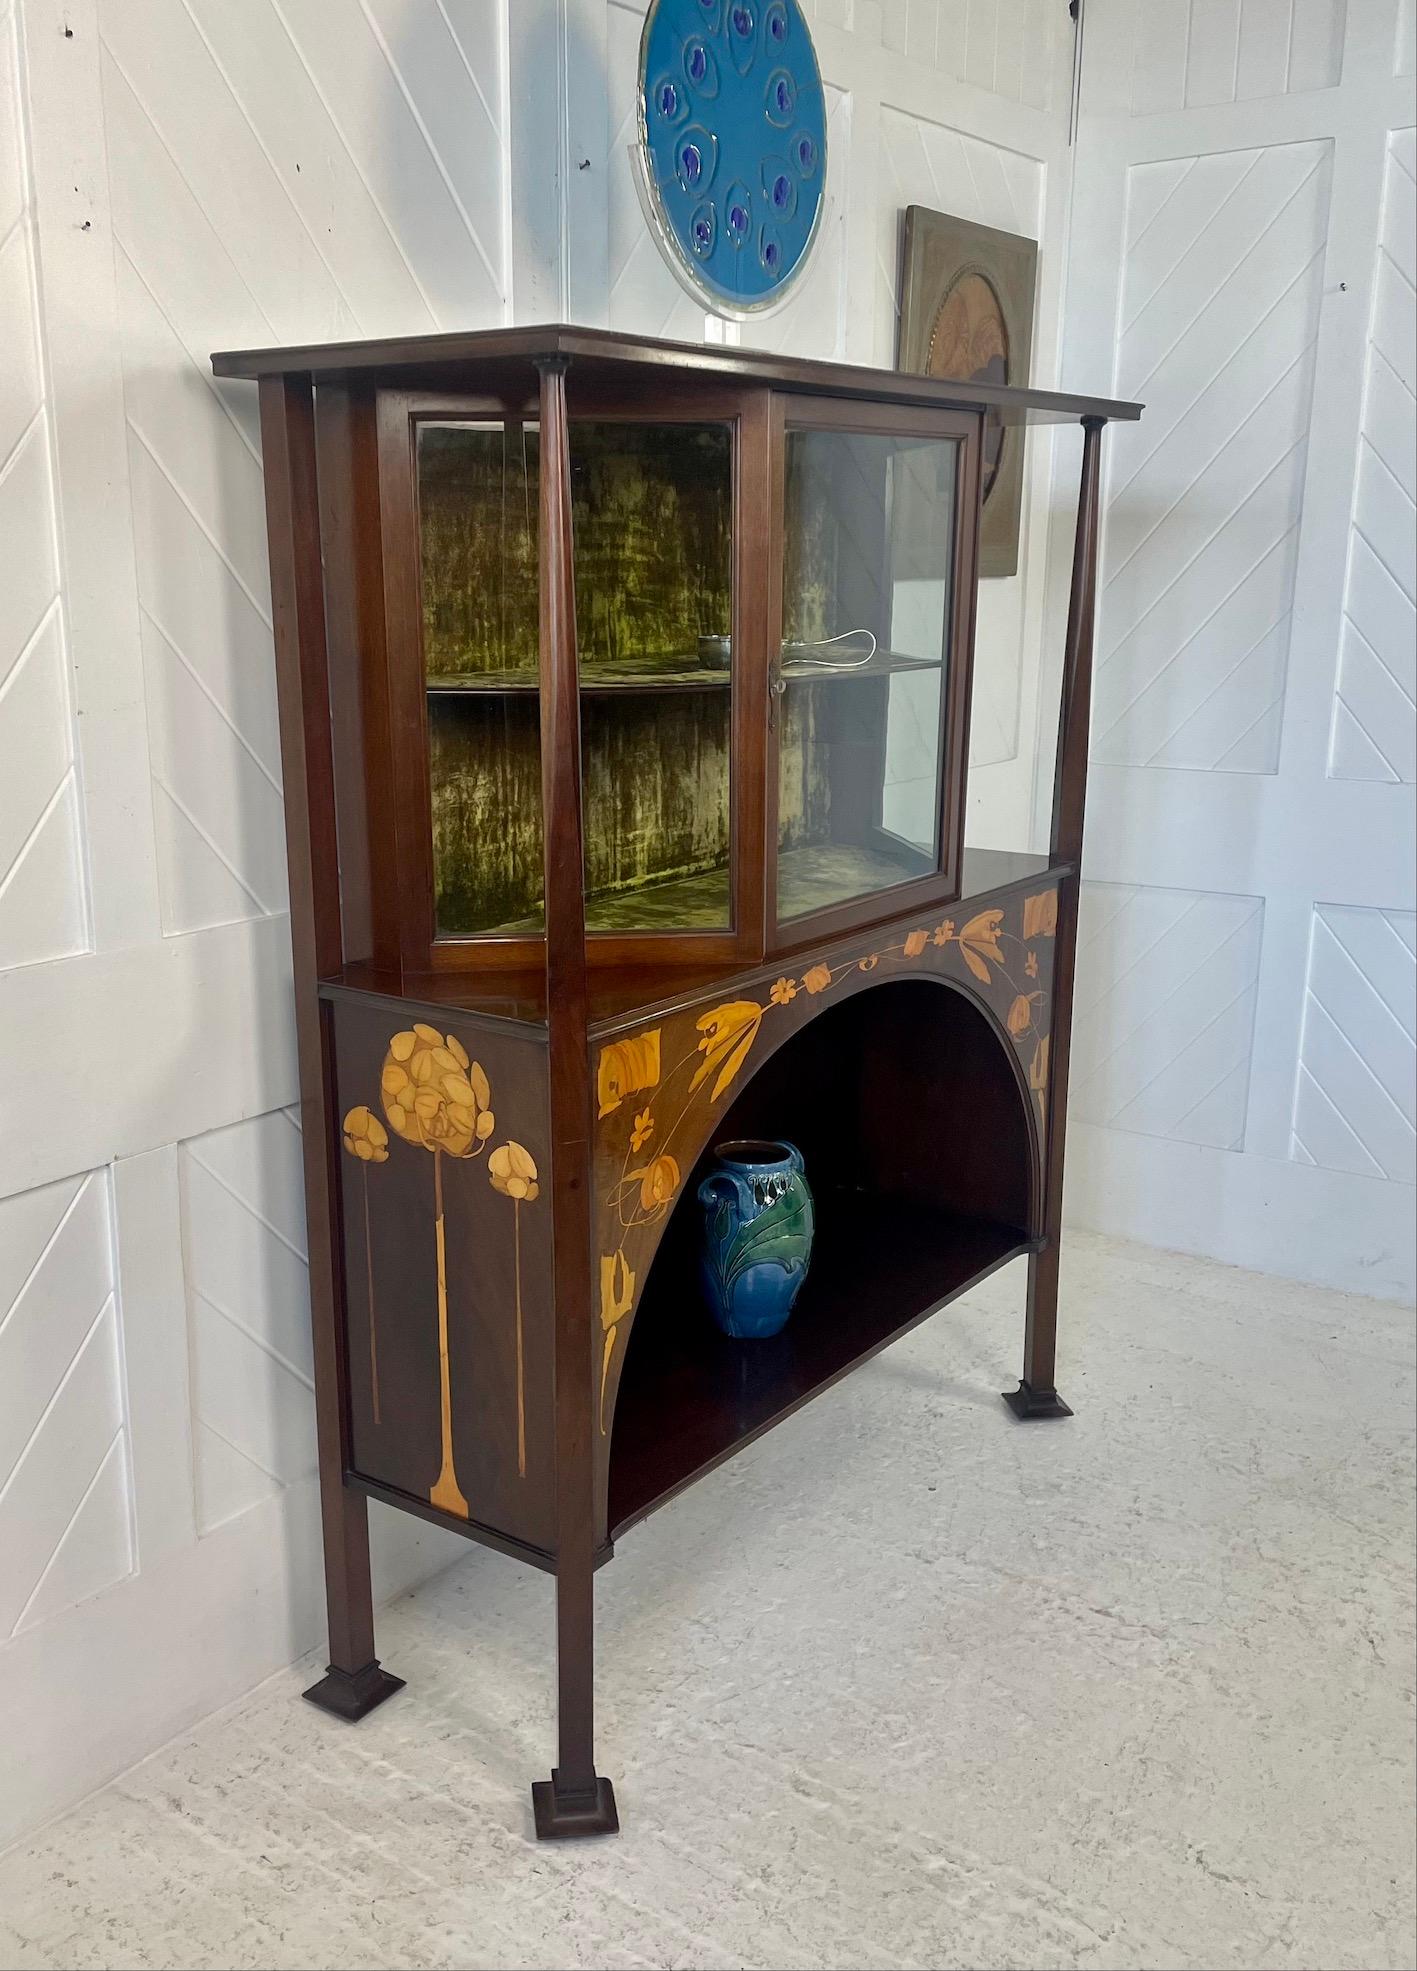 Glasgow School mahogany cabinet
With stylised trees, flower and foliage inlay design
Well proportioned canted glass display cabinet and original green crushed velvet interior
Voysey style uprights, flared feet and overhanging top
Lower display shelf